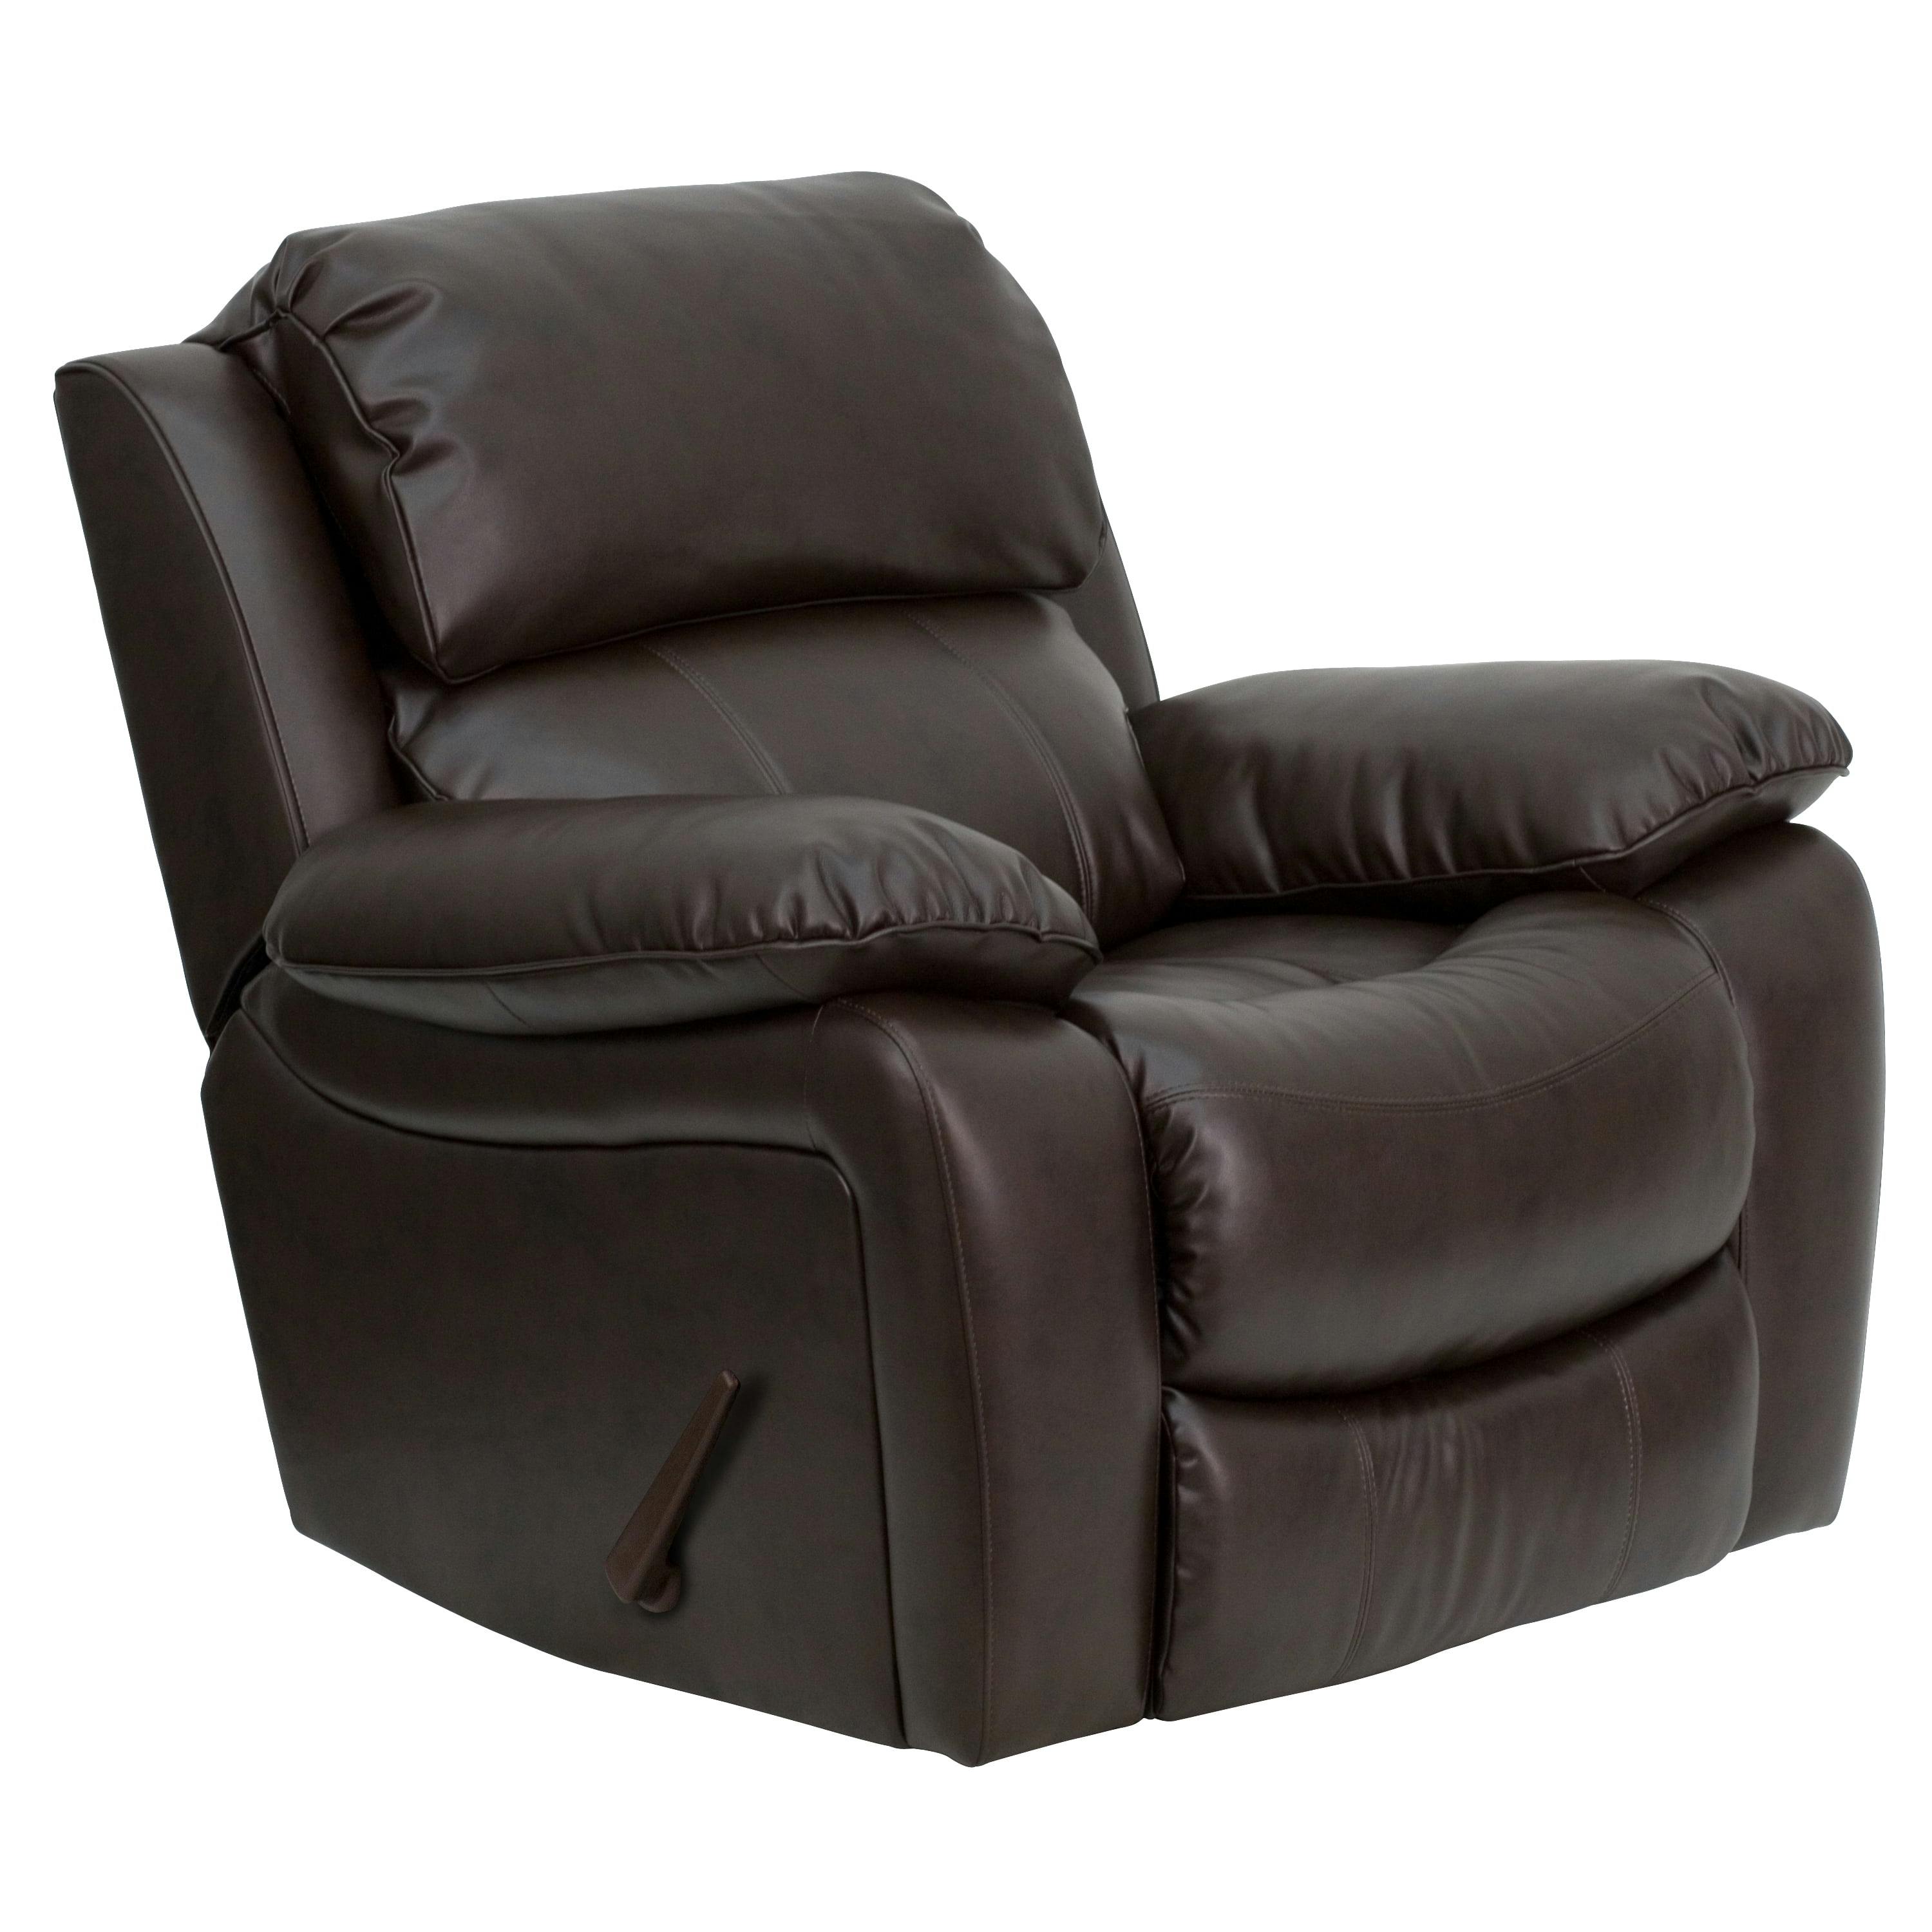 Sumptuous Brown LeatherSoft Rocker Recliner with Padded Comfort